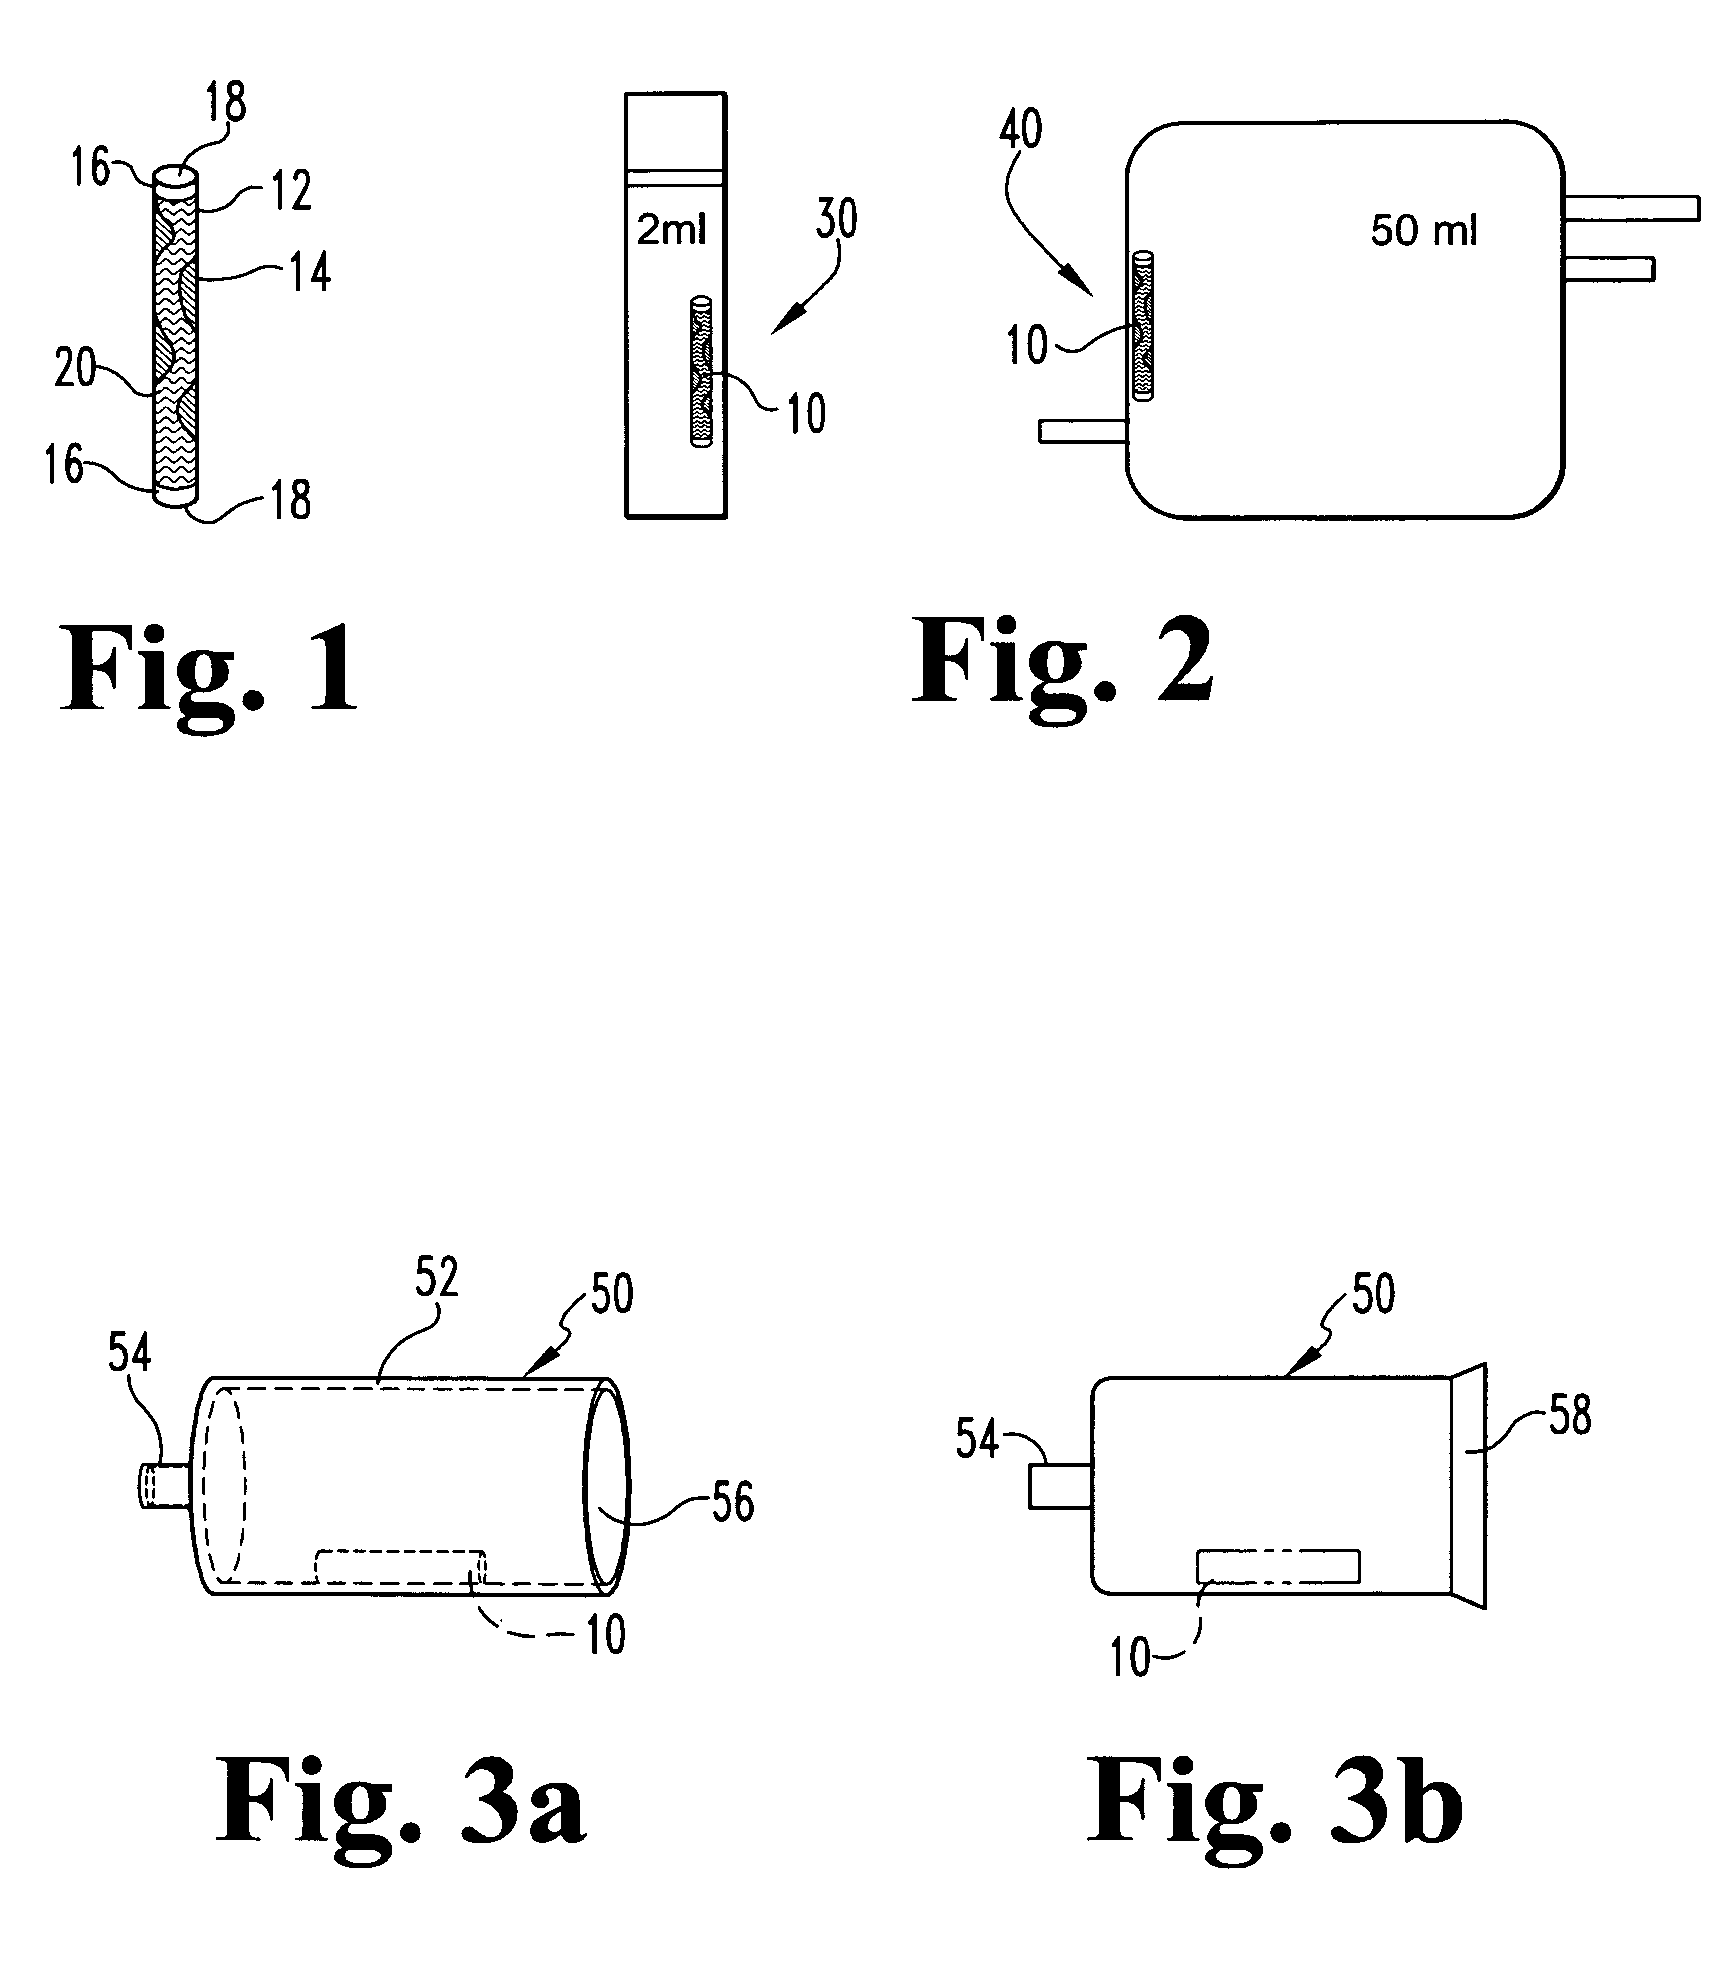 Systems and methods for cryopreservation of cells